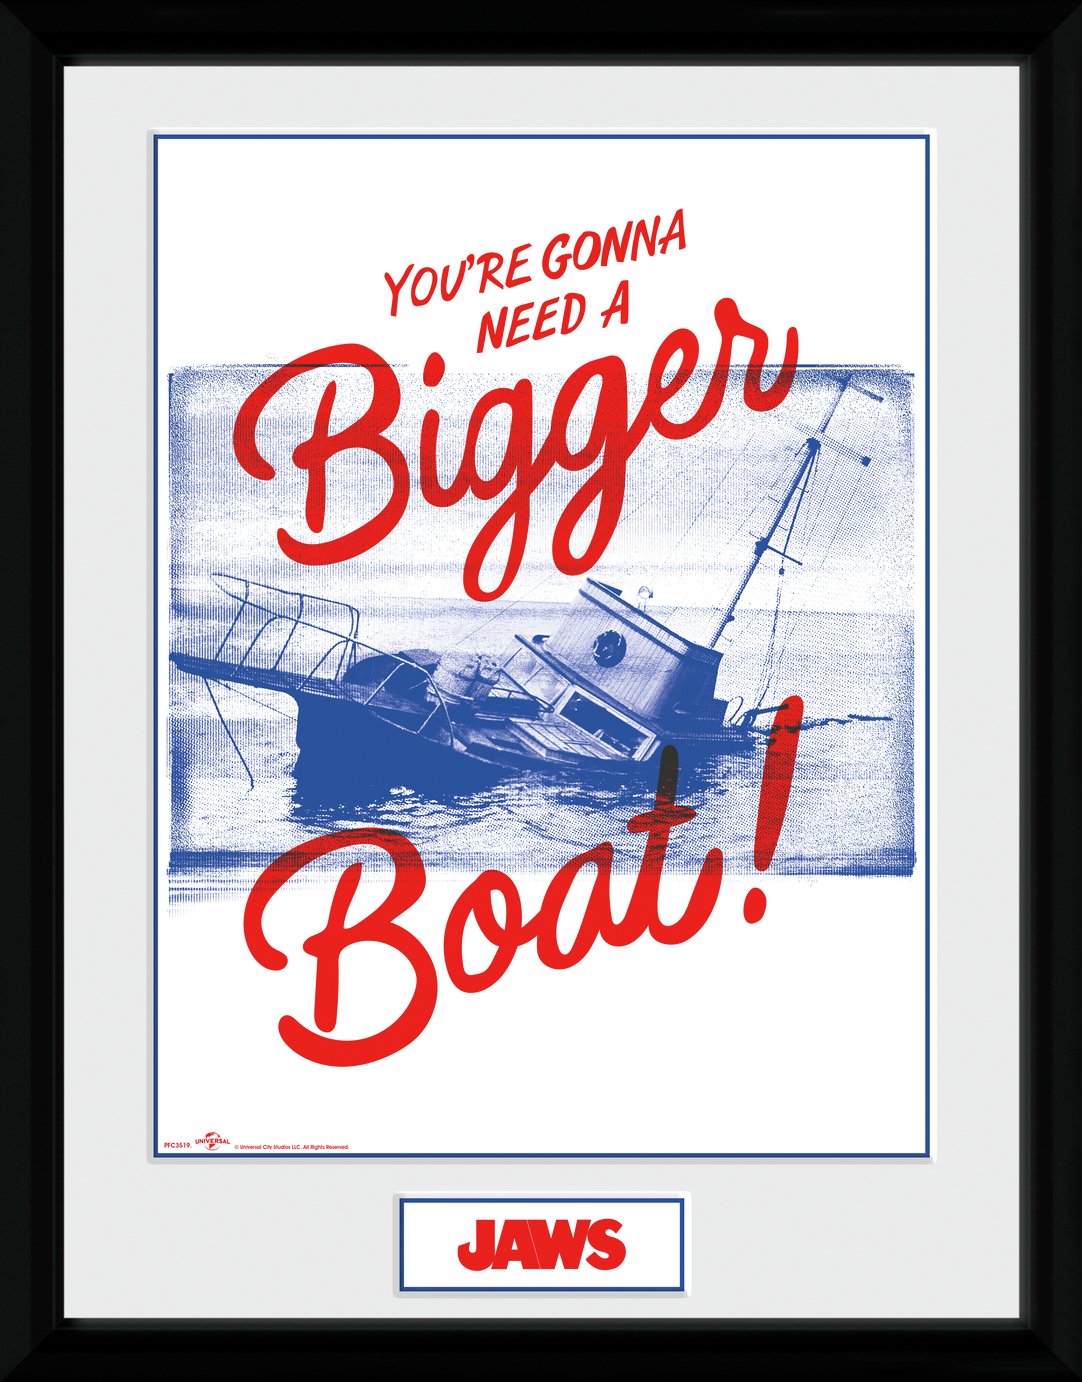 Jaws Bigger Boat Typpographic Framed Print - 30x40cm